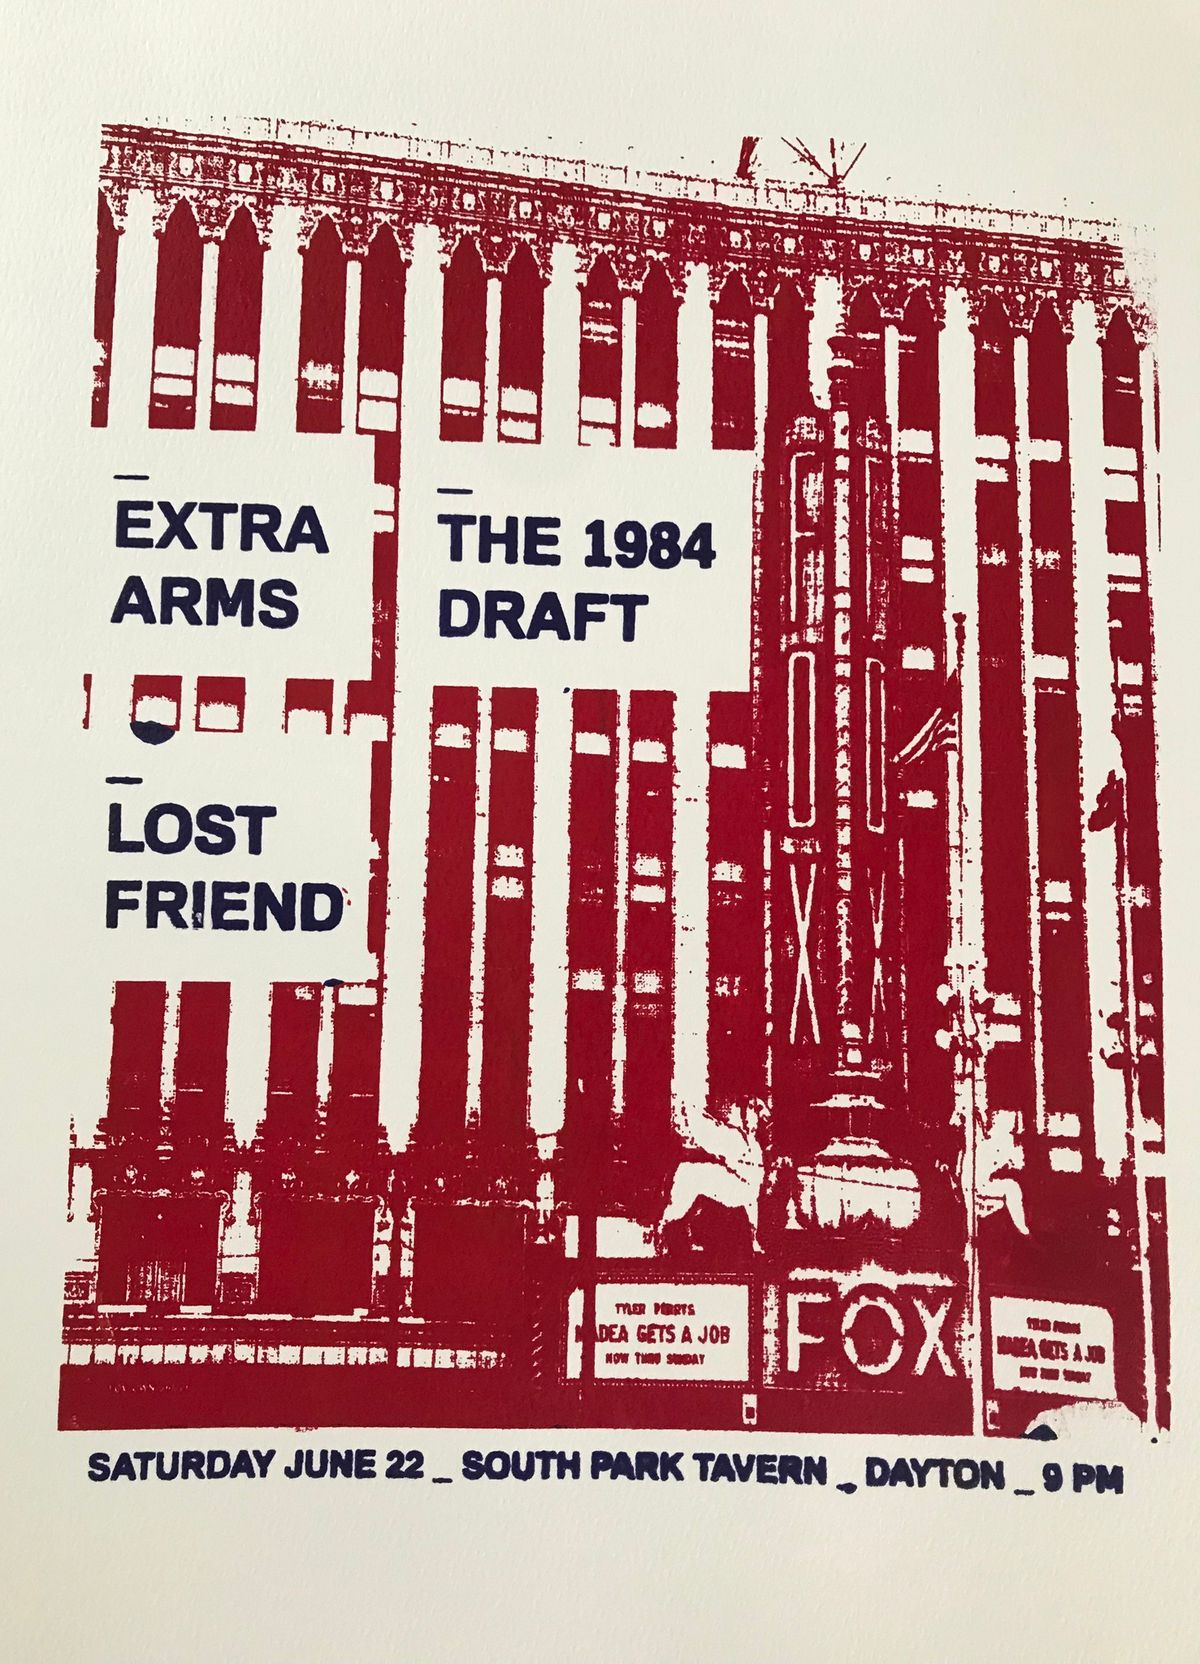 The 1984 Draft, Extra Arms, Lost Friend play Dayton